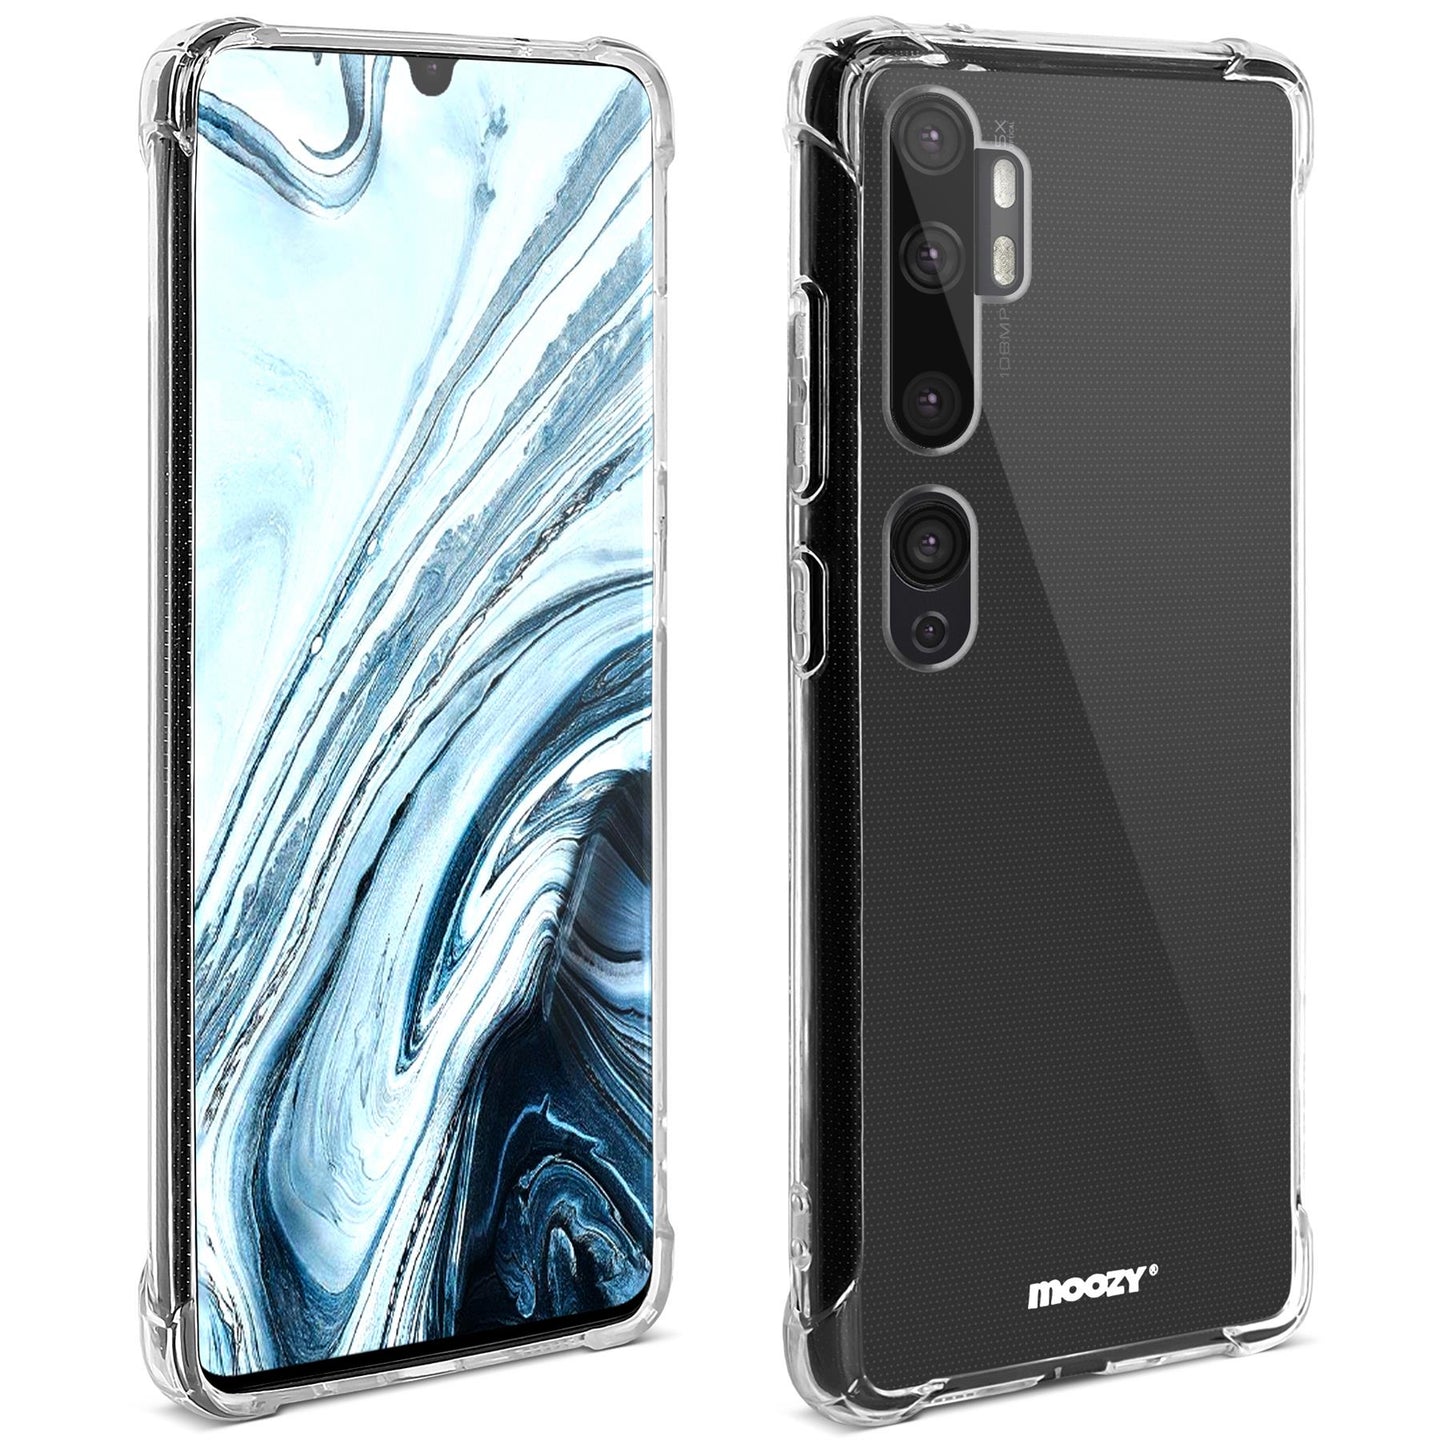 Moozy Shock Proof Silicone Case for Xiaomi Mi Note 10, Xiaomi Mi Note 10 Pro - Transparent Crystal Clear Phone Case Soft TPU Cover